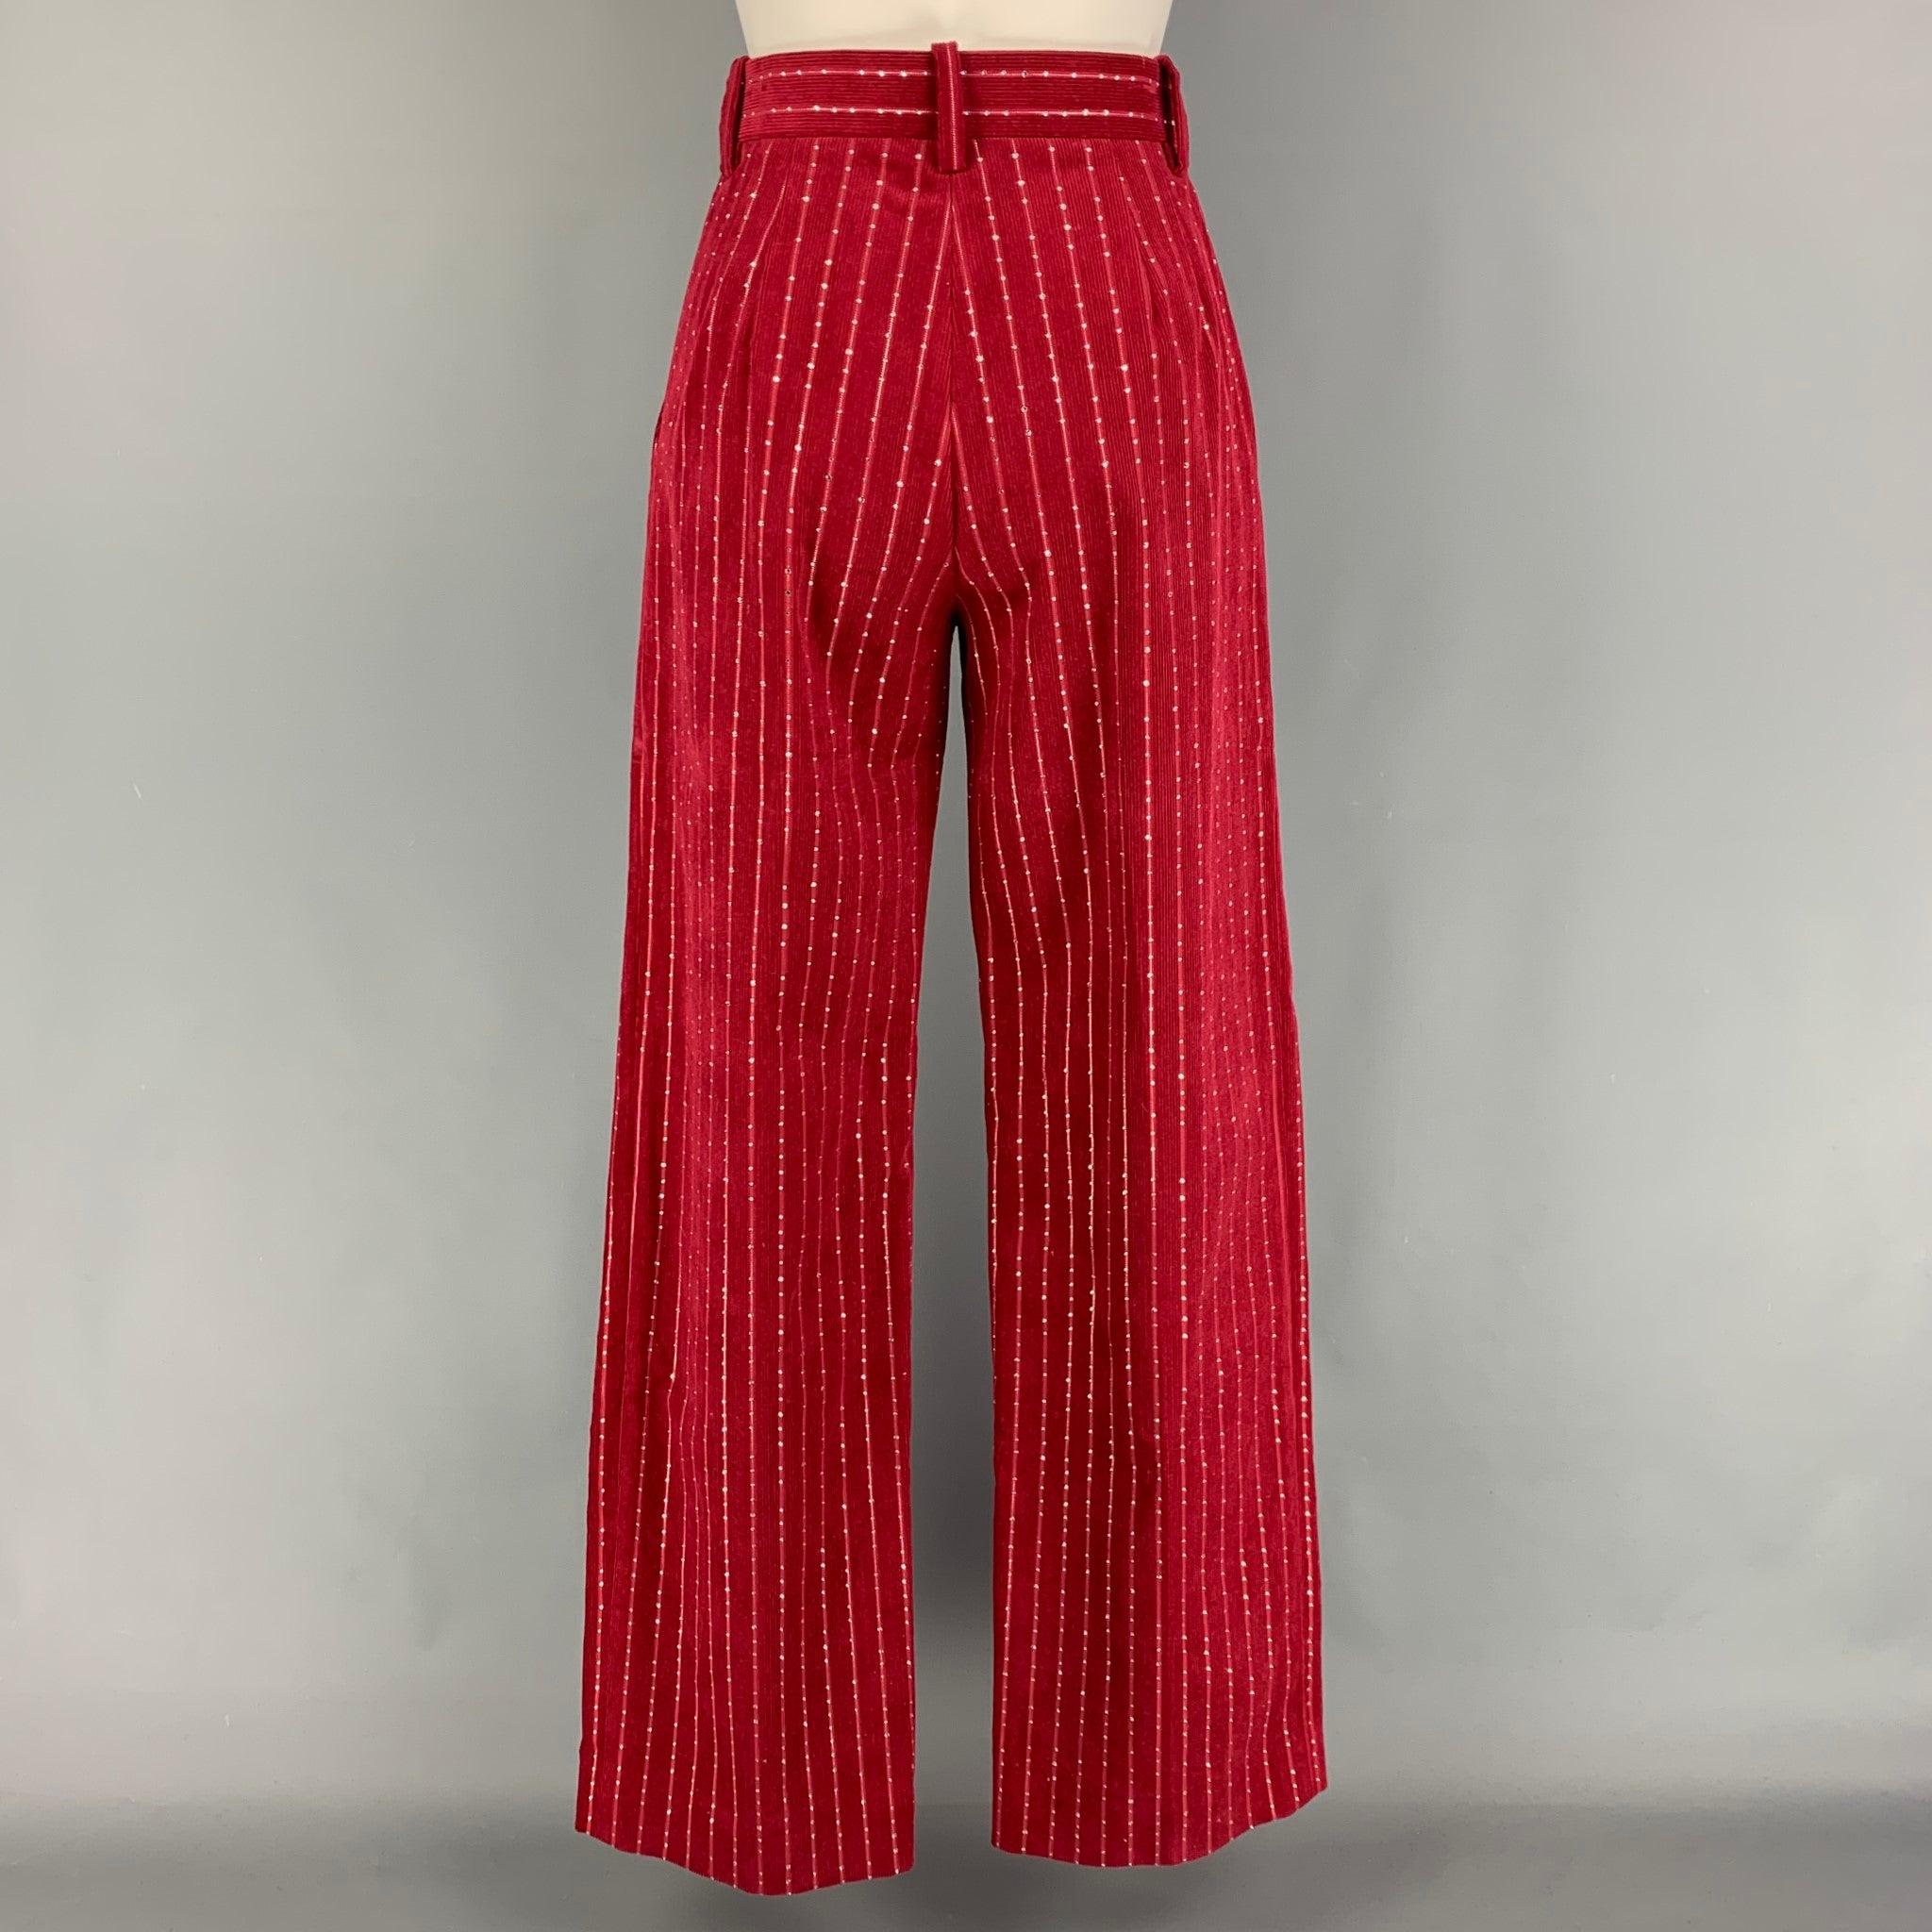 MARC JACOBS RUNWAY Spring 2020 Cotton Lurex Corduroy Wide Leg Dress Pants In Good Condition For Sale In San Francisco, CA